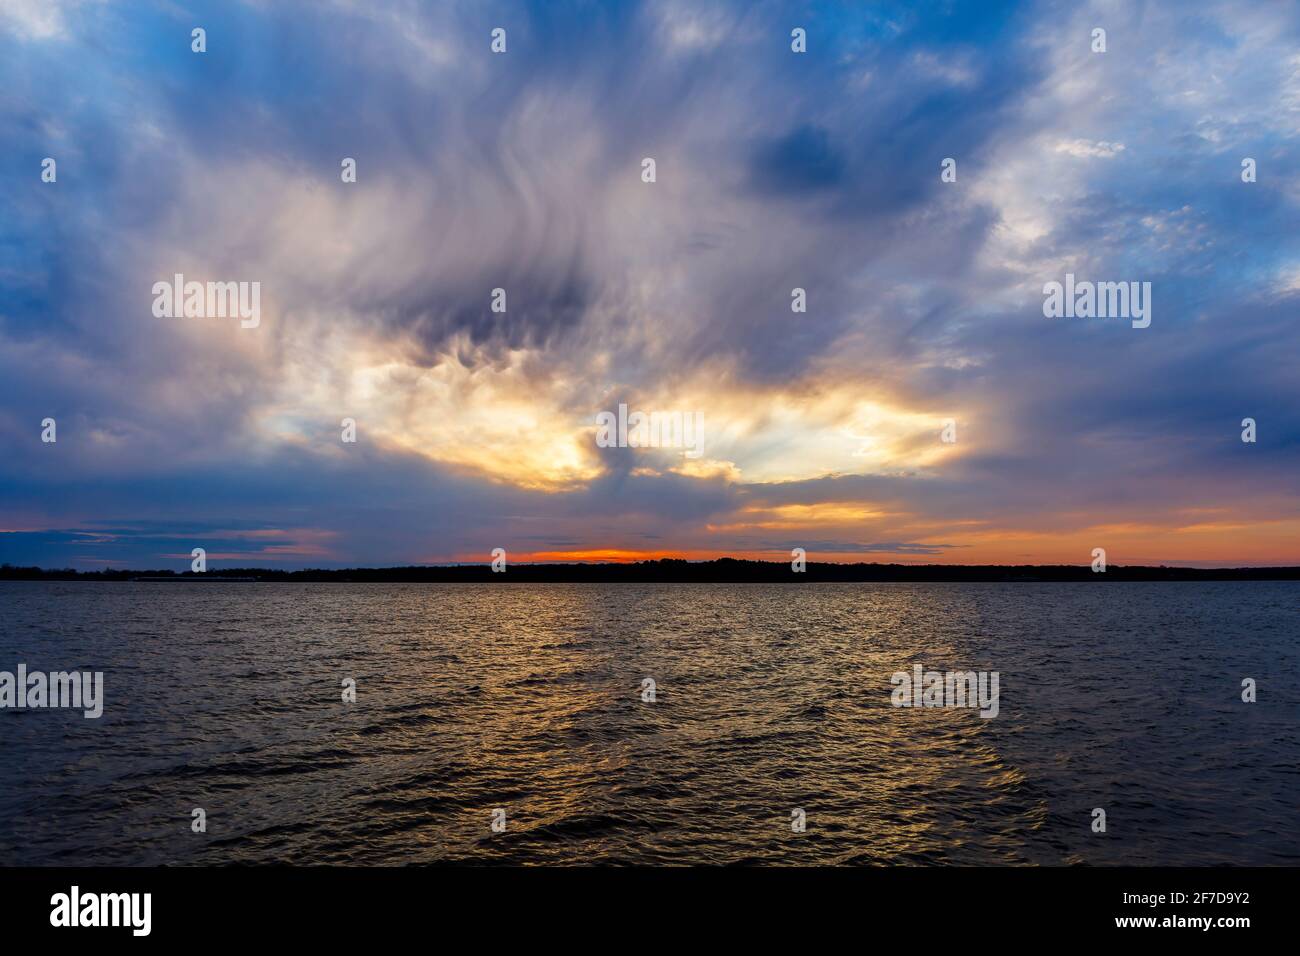 sunset on a lake in Oklahoma. Stock Photo